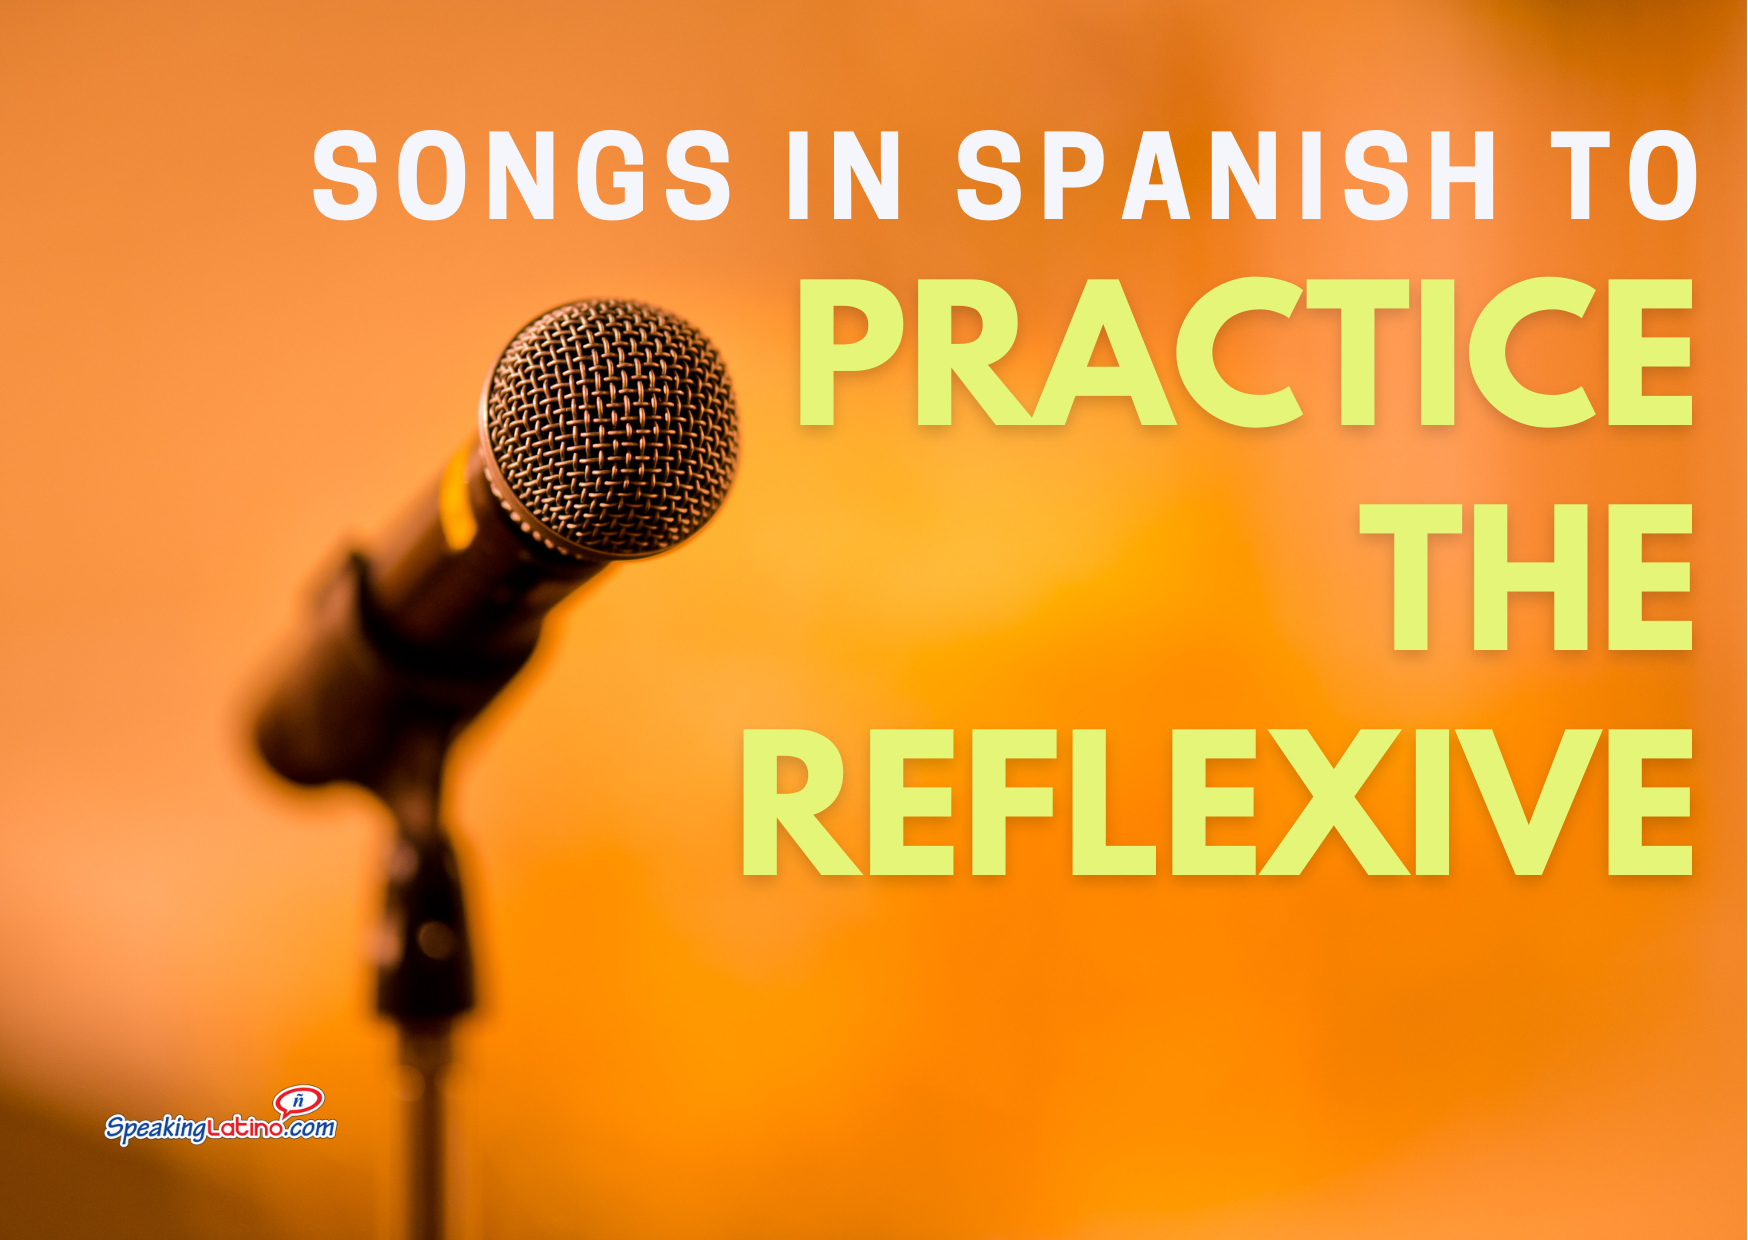 5 Songs In Spanish To Practice Reflexive Verbs